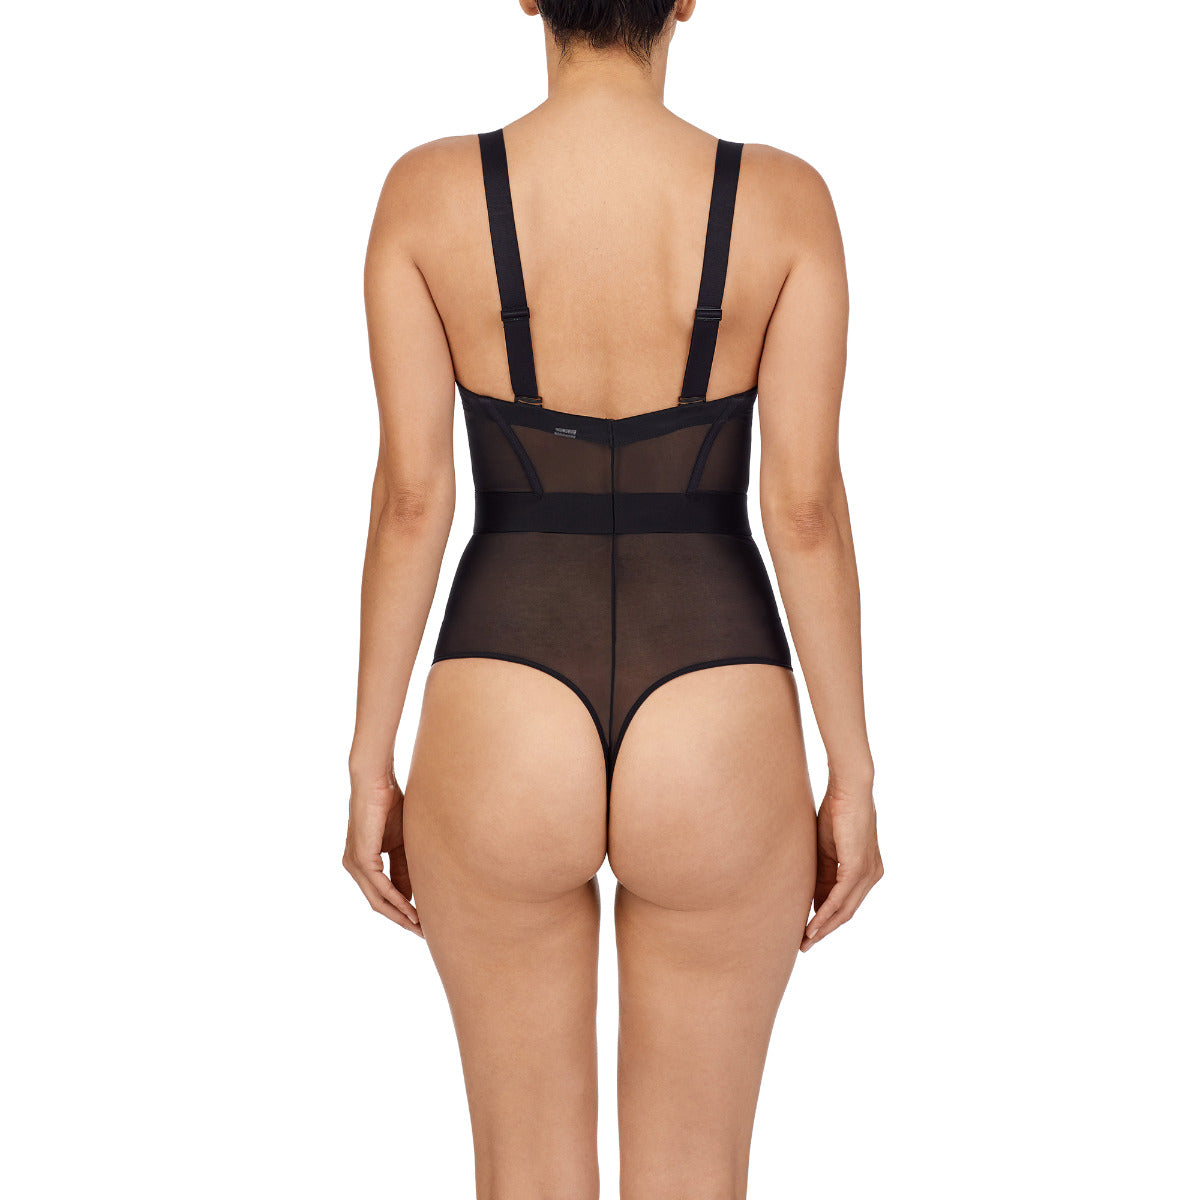 Strapless Unlined Push Up Bodysuit Stock Image - Image of strapless,  mature: 229808909